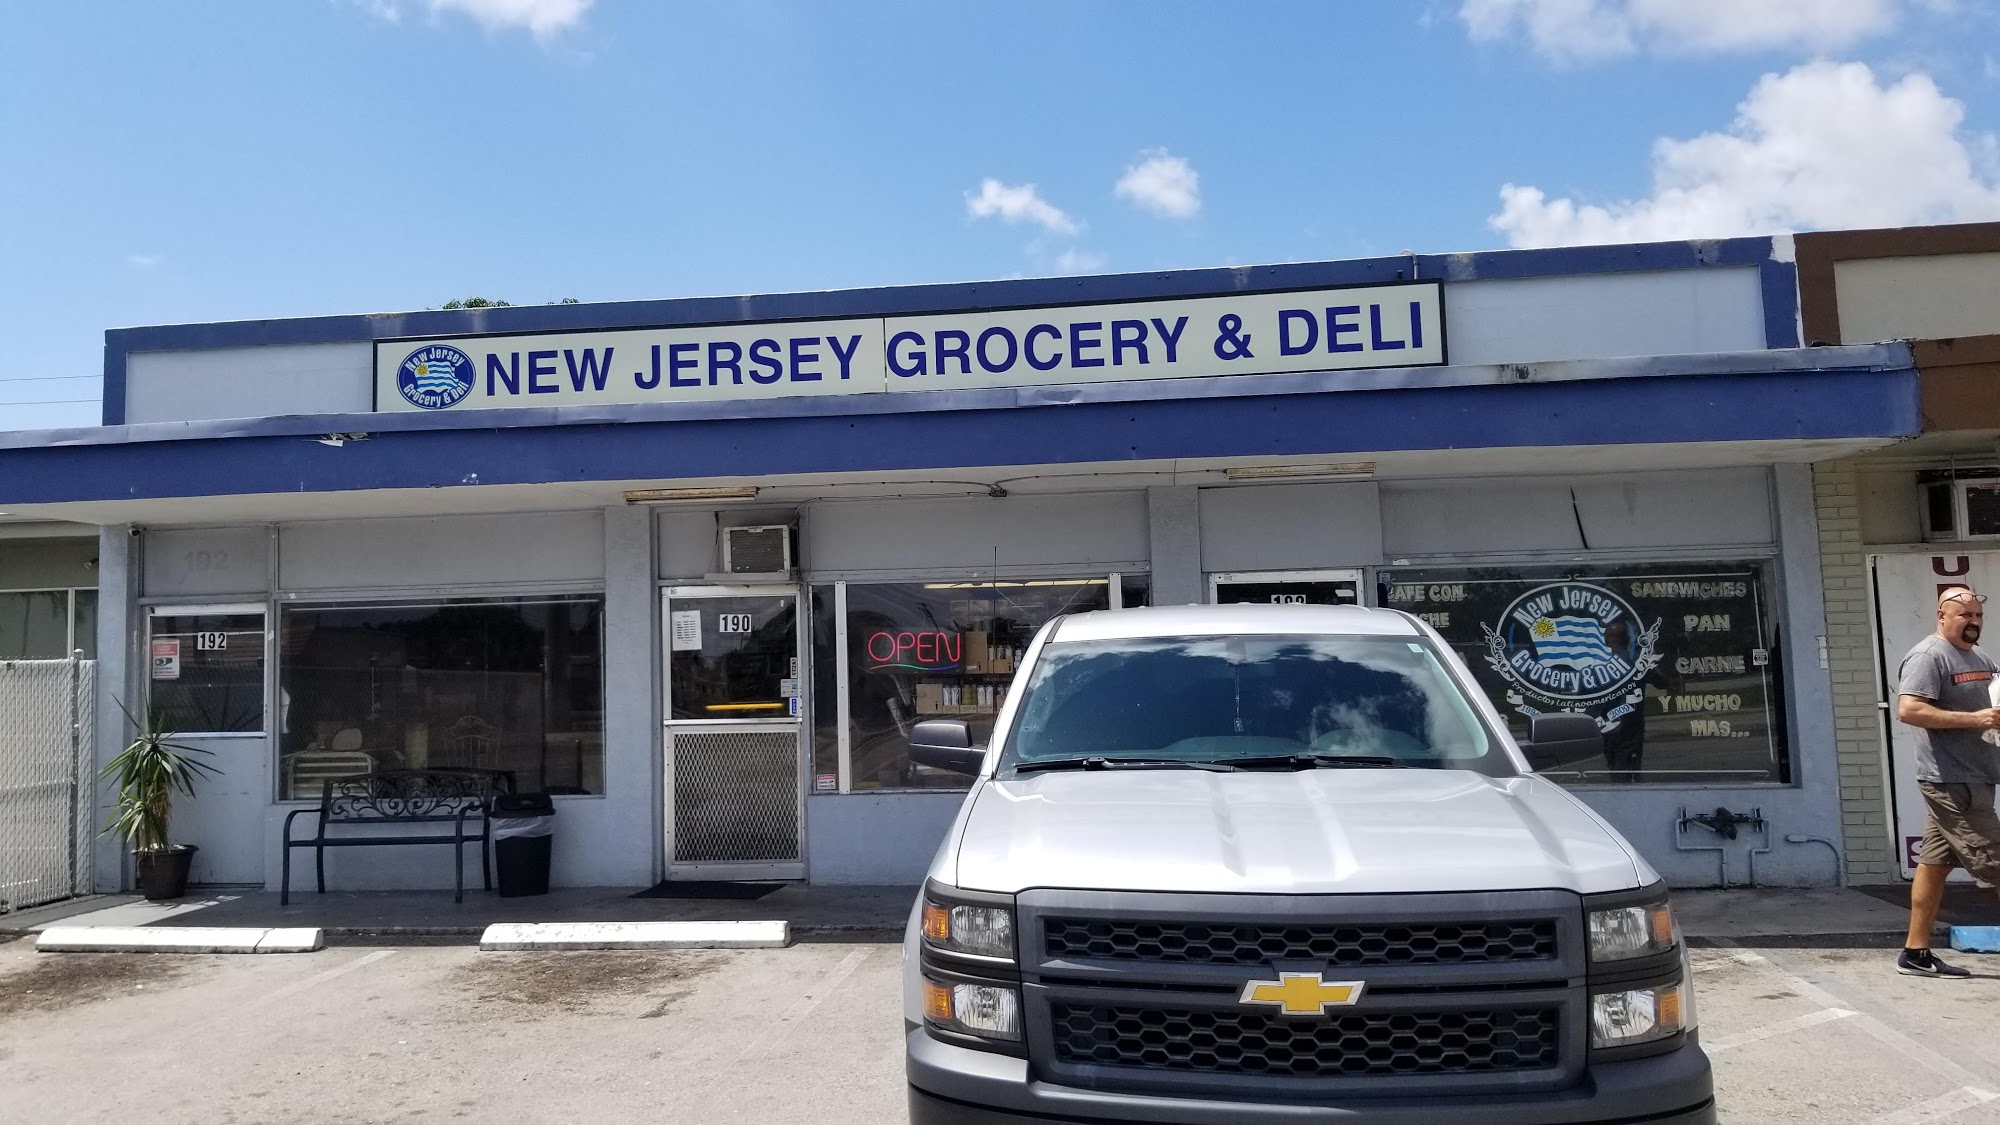 New Jersey Grocery & Deli